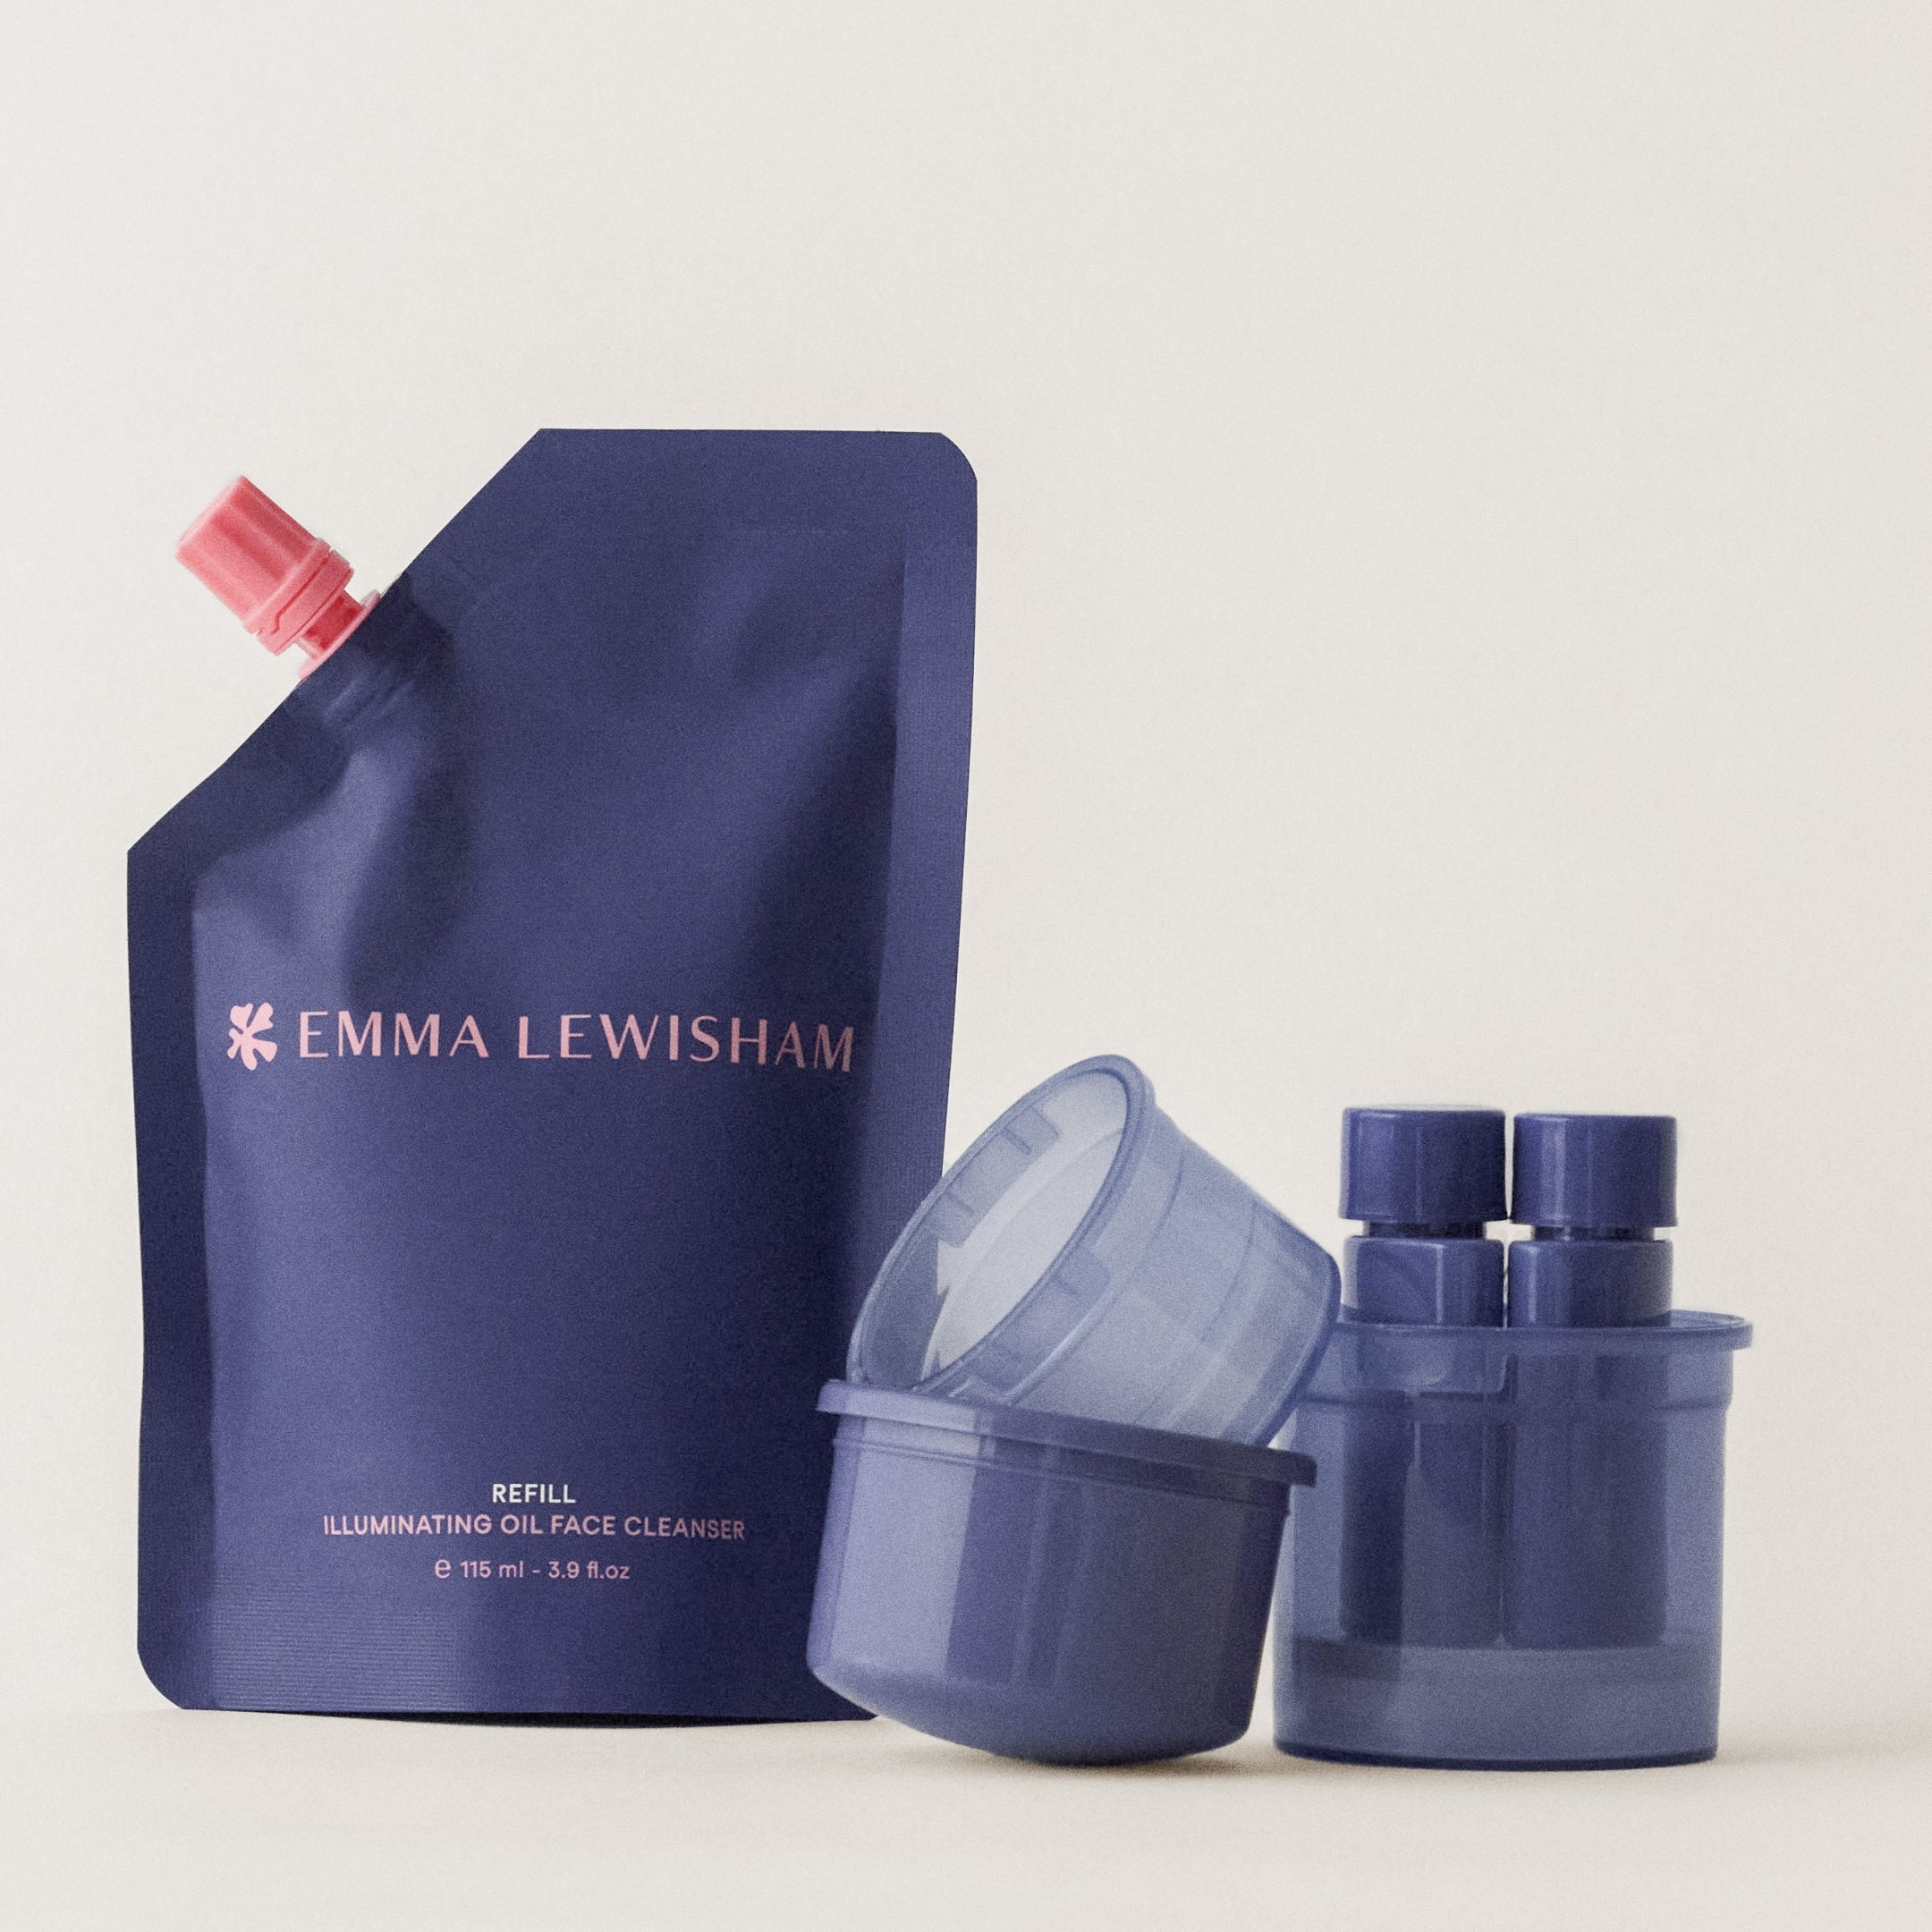 How to refill your Emma Lewisham products